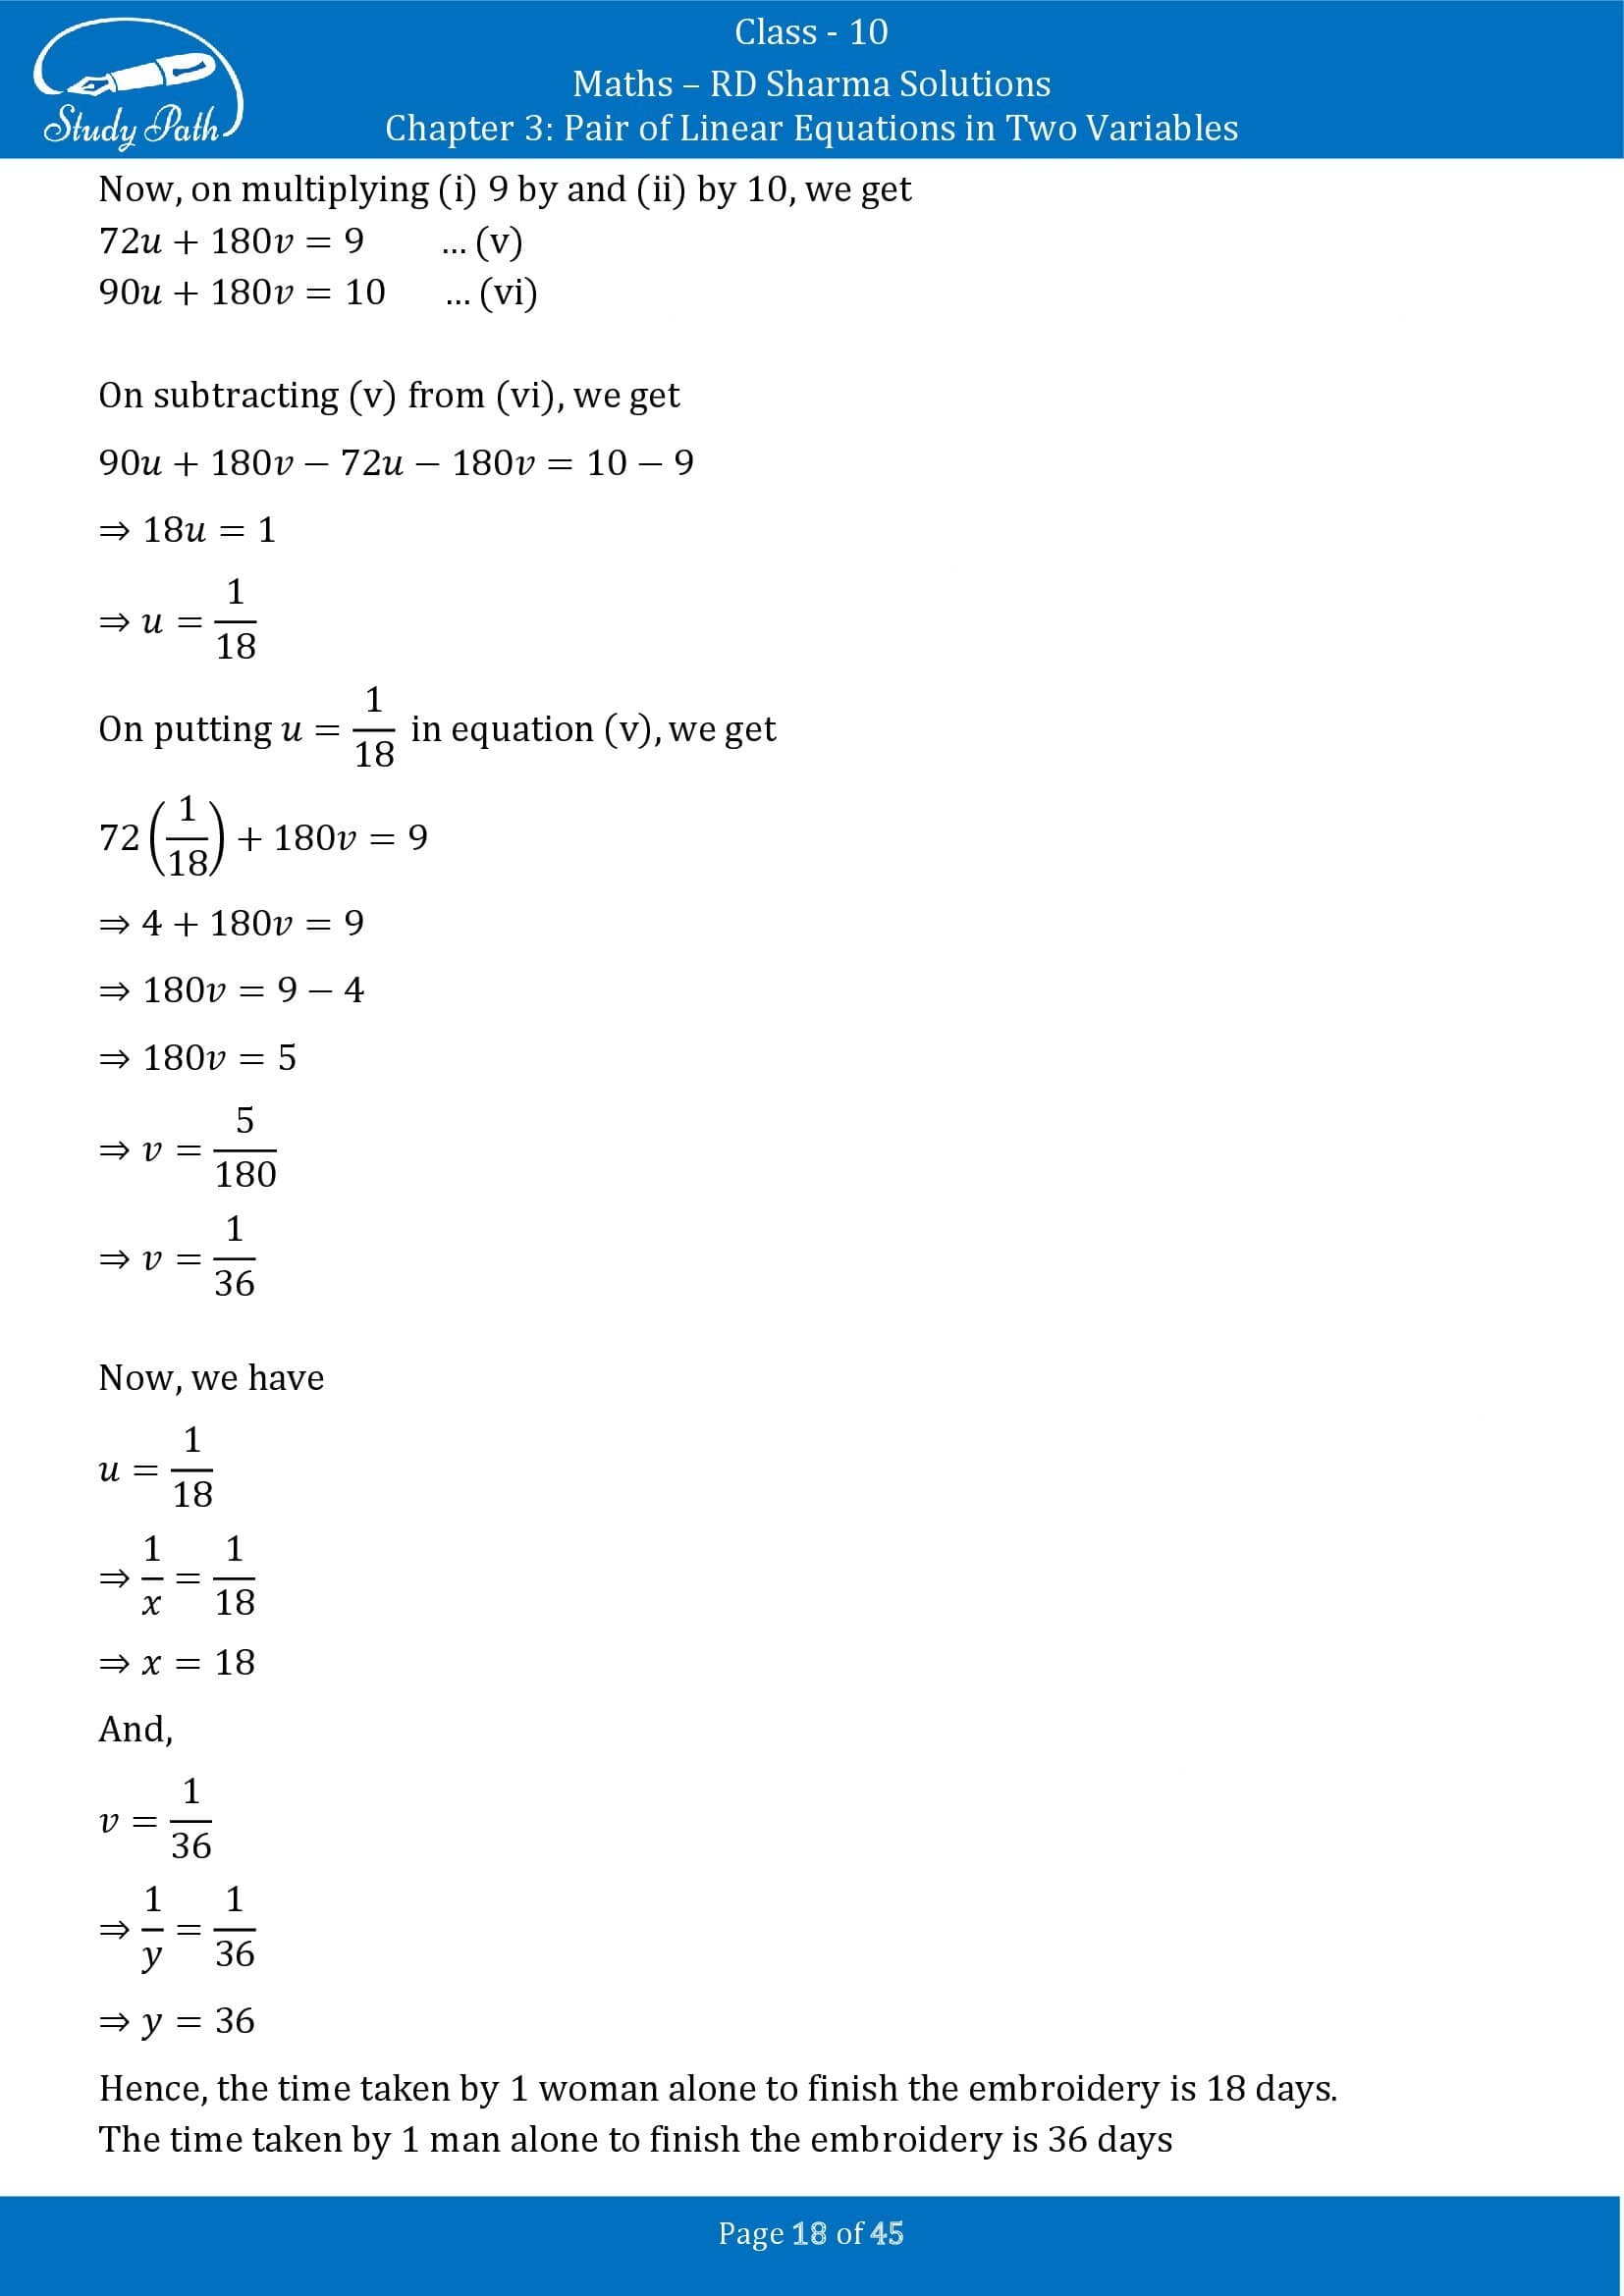 RD Sharma Solutions Class 10 Chapter 3 Pair of Linear Equations in Two Variables Exercise 3.11 00018